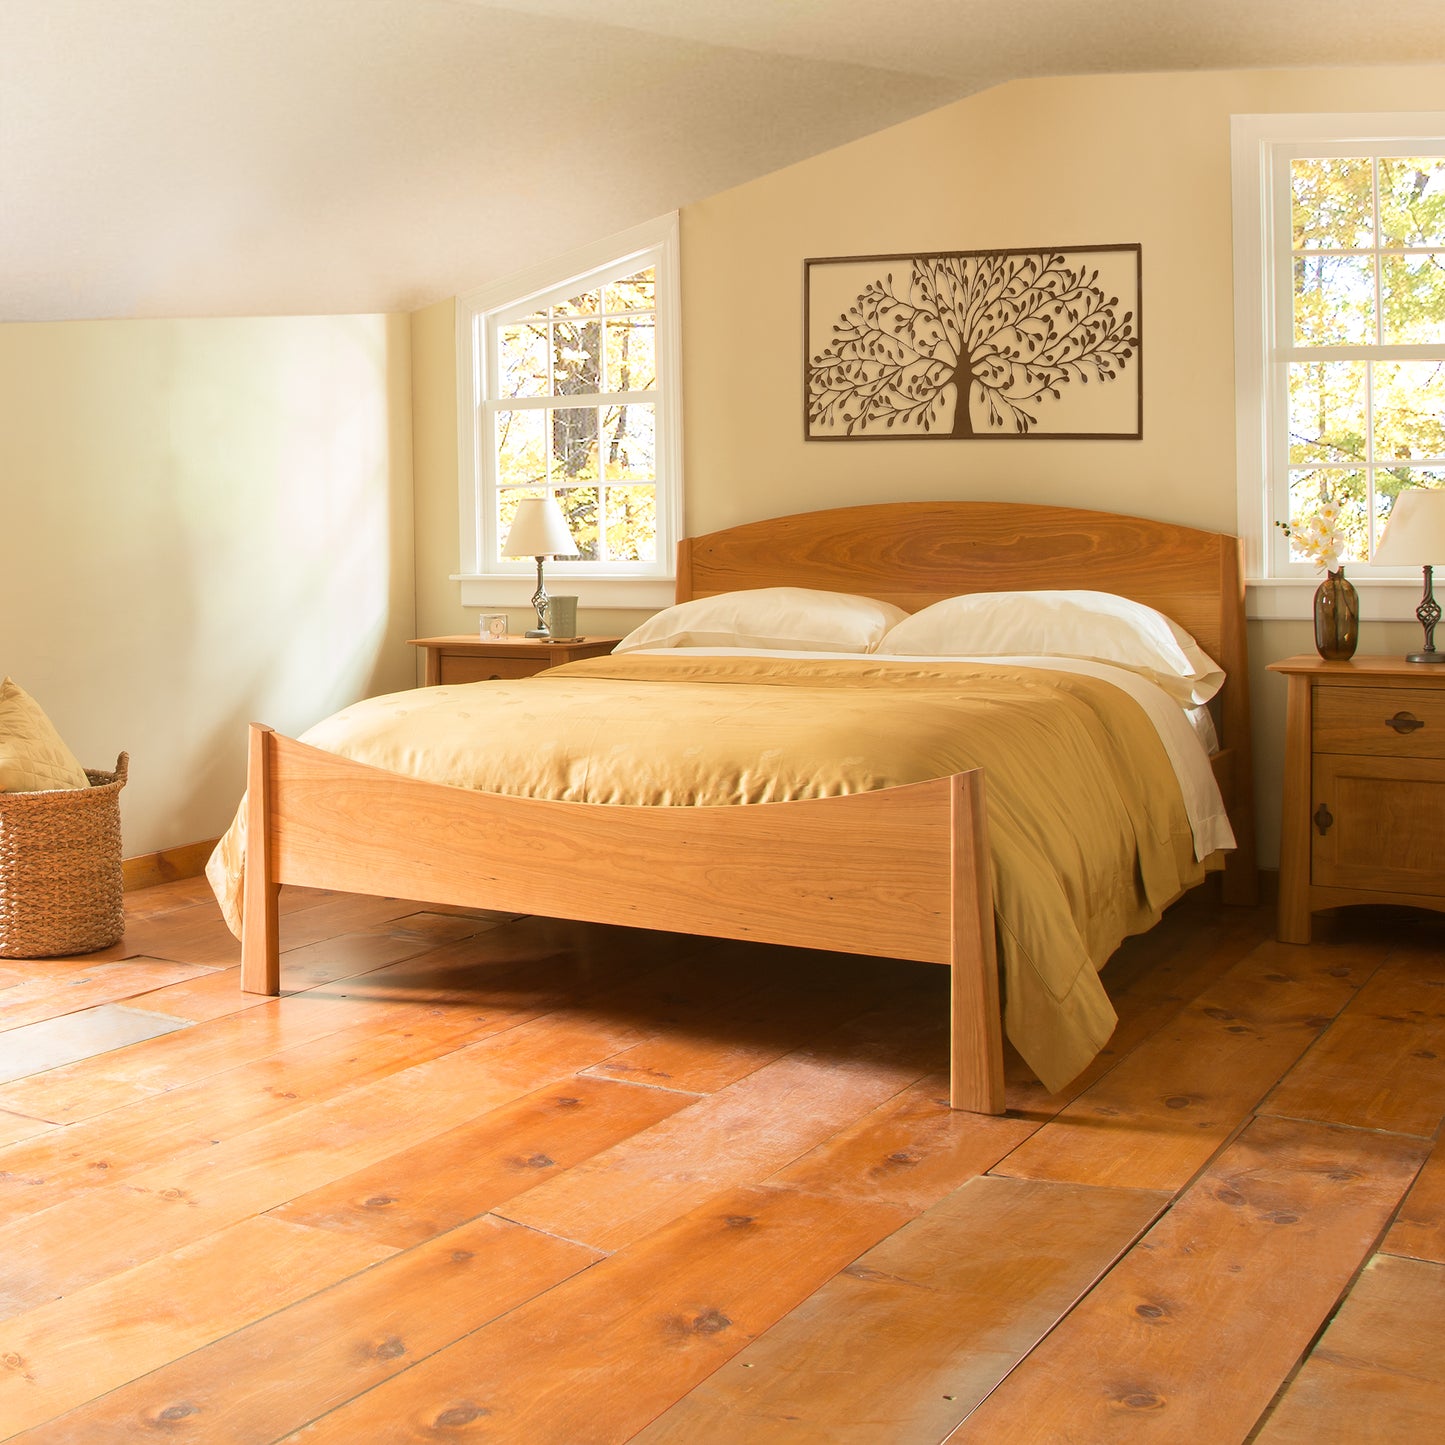 A warmly lit bedroom featuring a Maple Corner Woodworks Cherry Moon Bed with a yellow bedspread, polished wooden floor, and tree artwork above the bed. Two large windows let in sunlight, with wicker baskets in the corner.